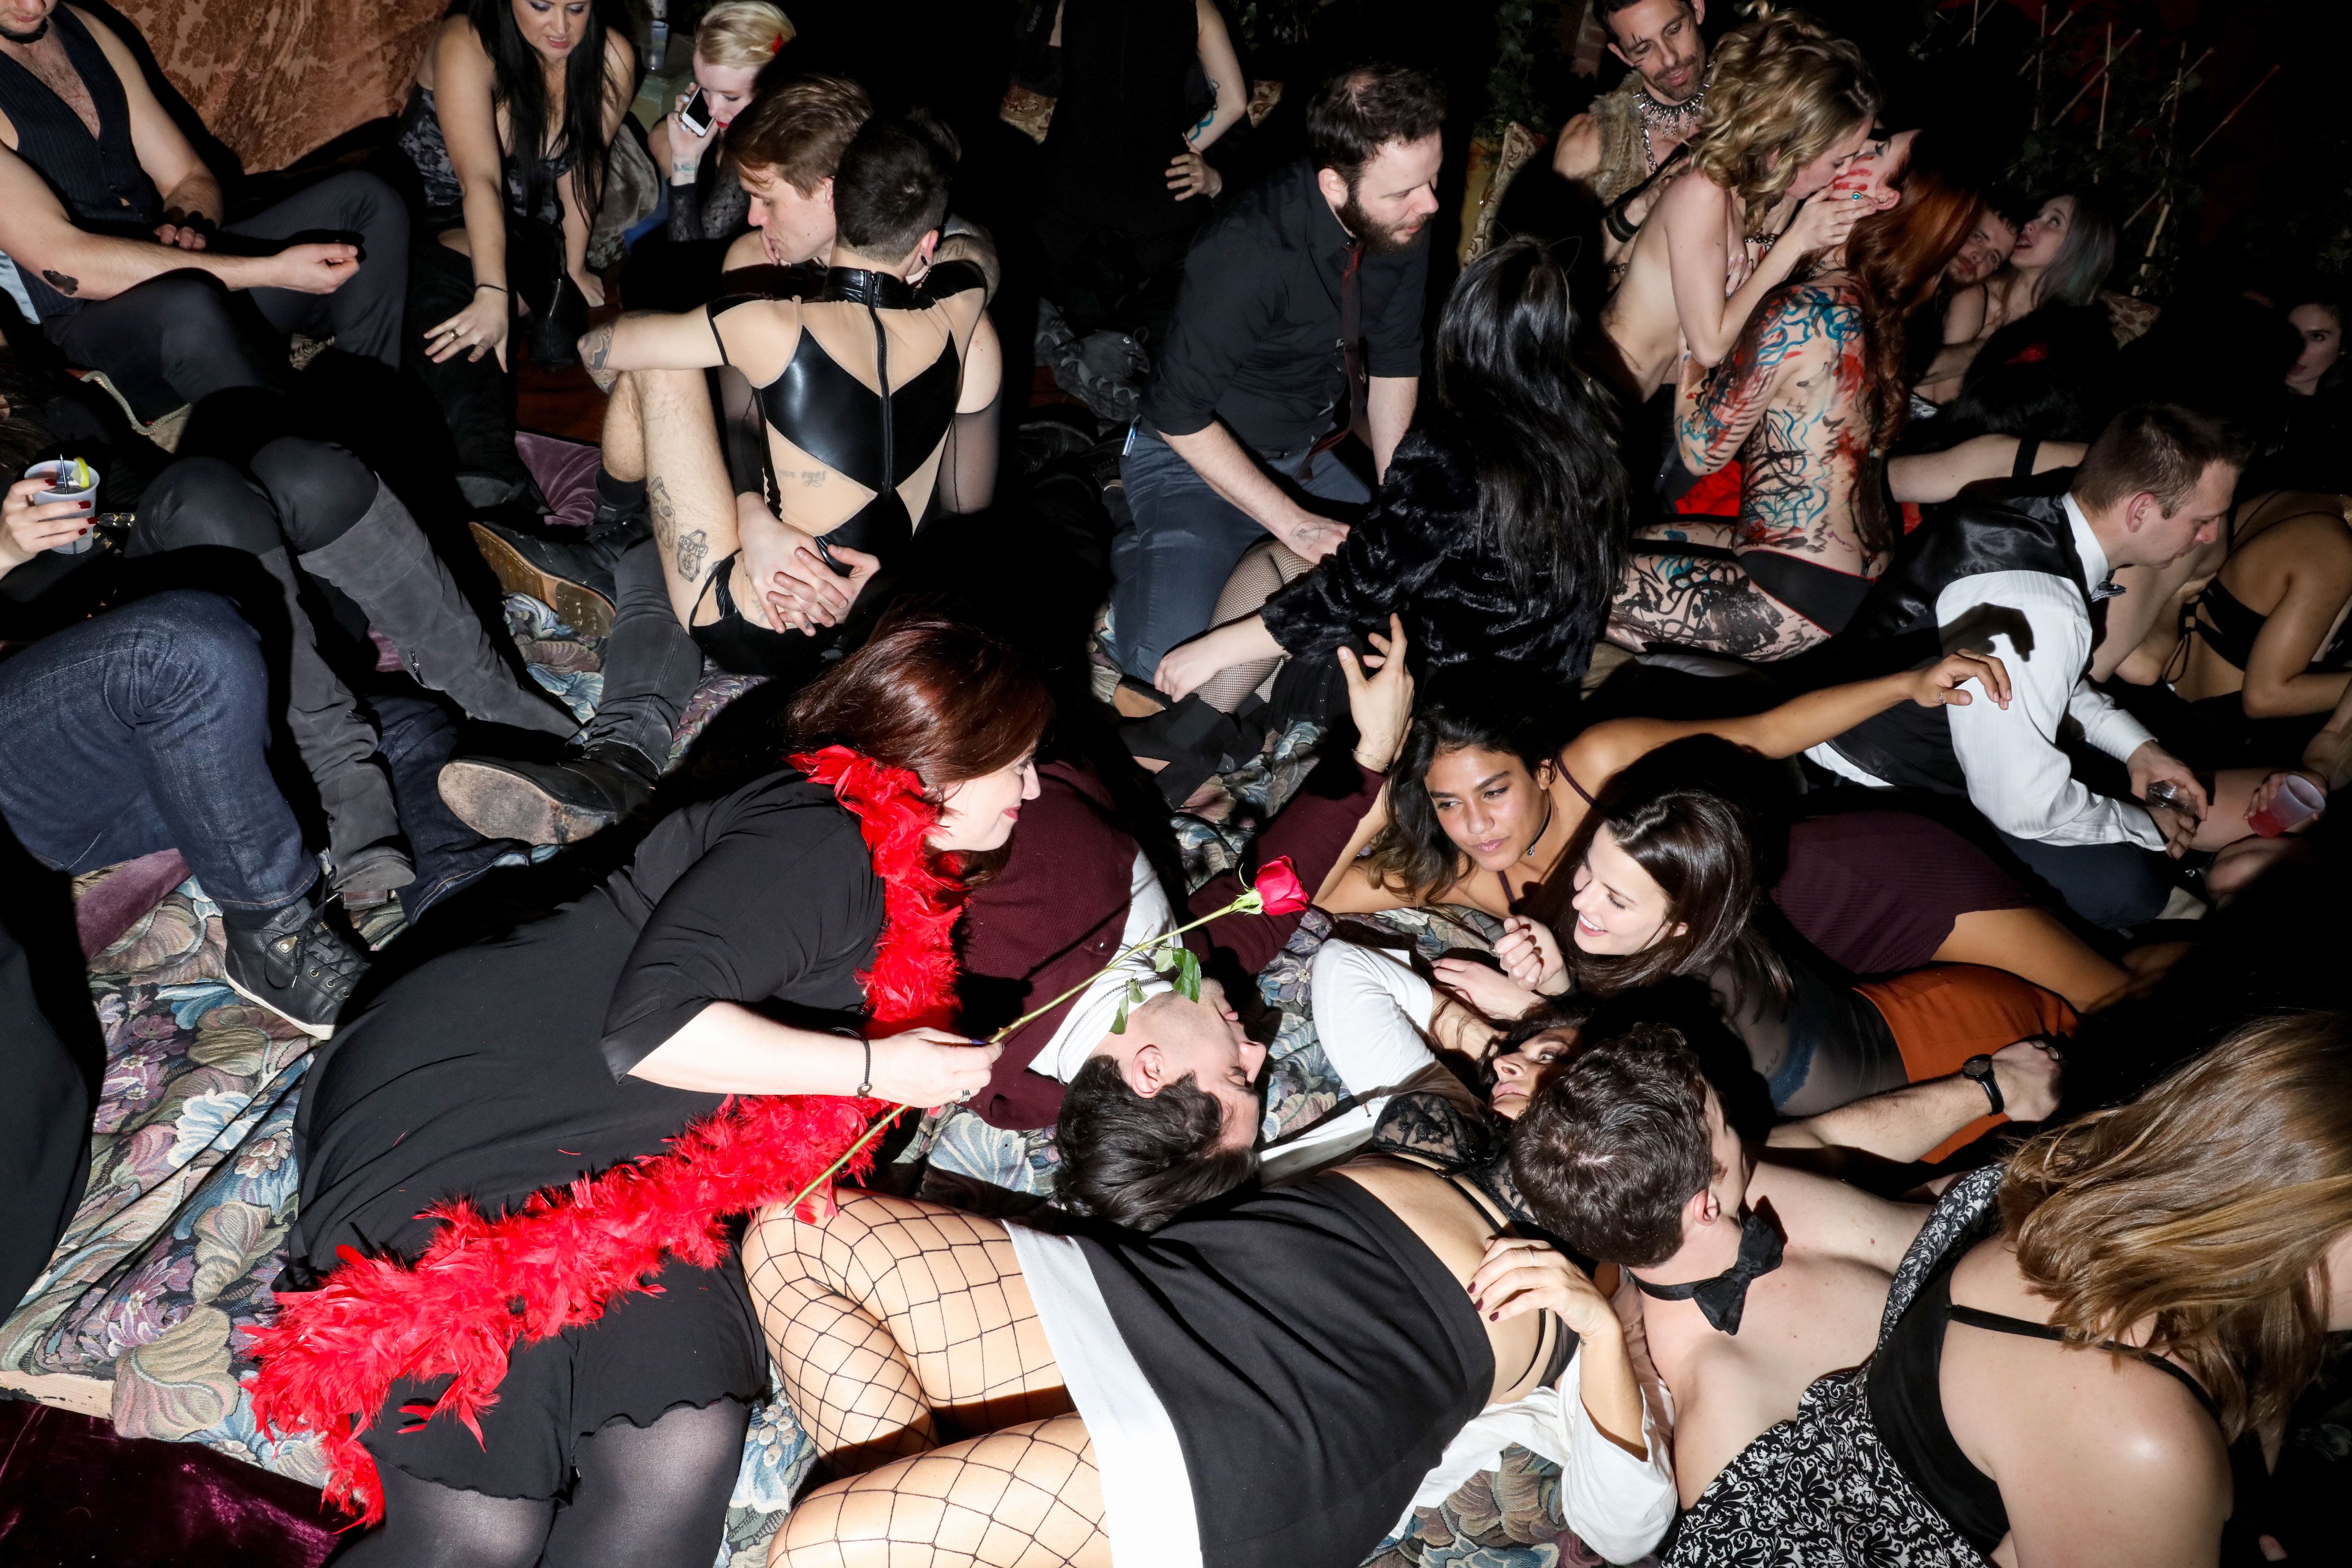 4500px x 3000px - I Went to An Erotic Dinner Party and Ate Food off of Naked Strangers - LUST  by Abby Hertz